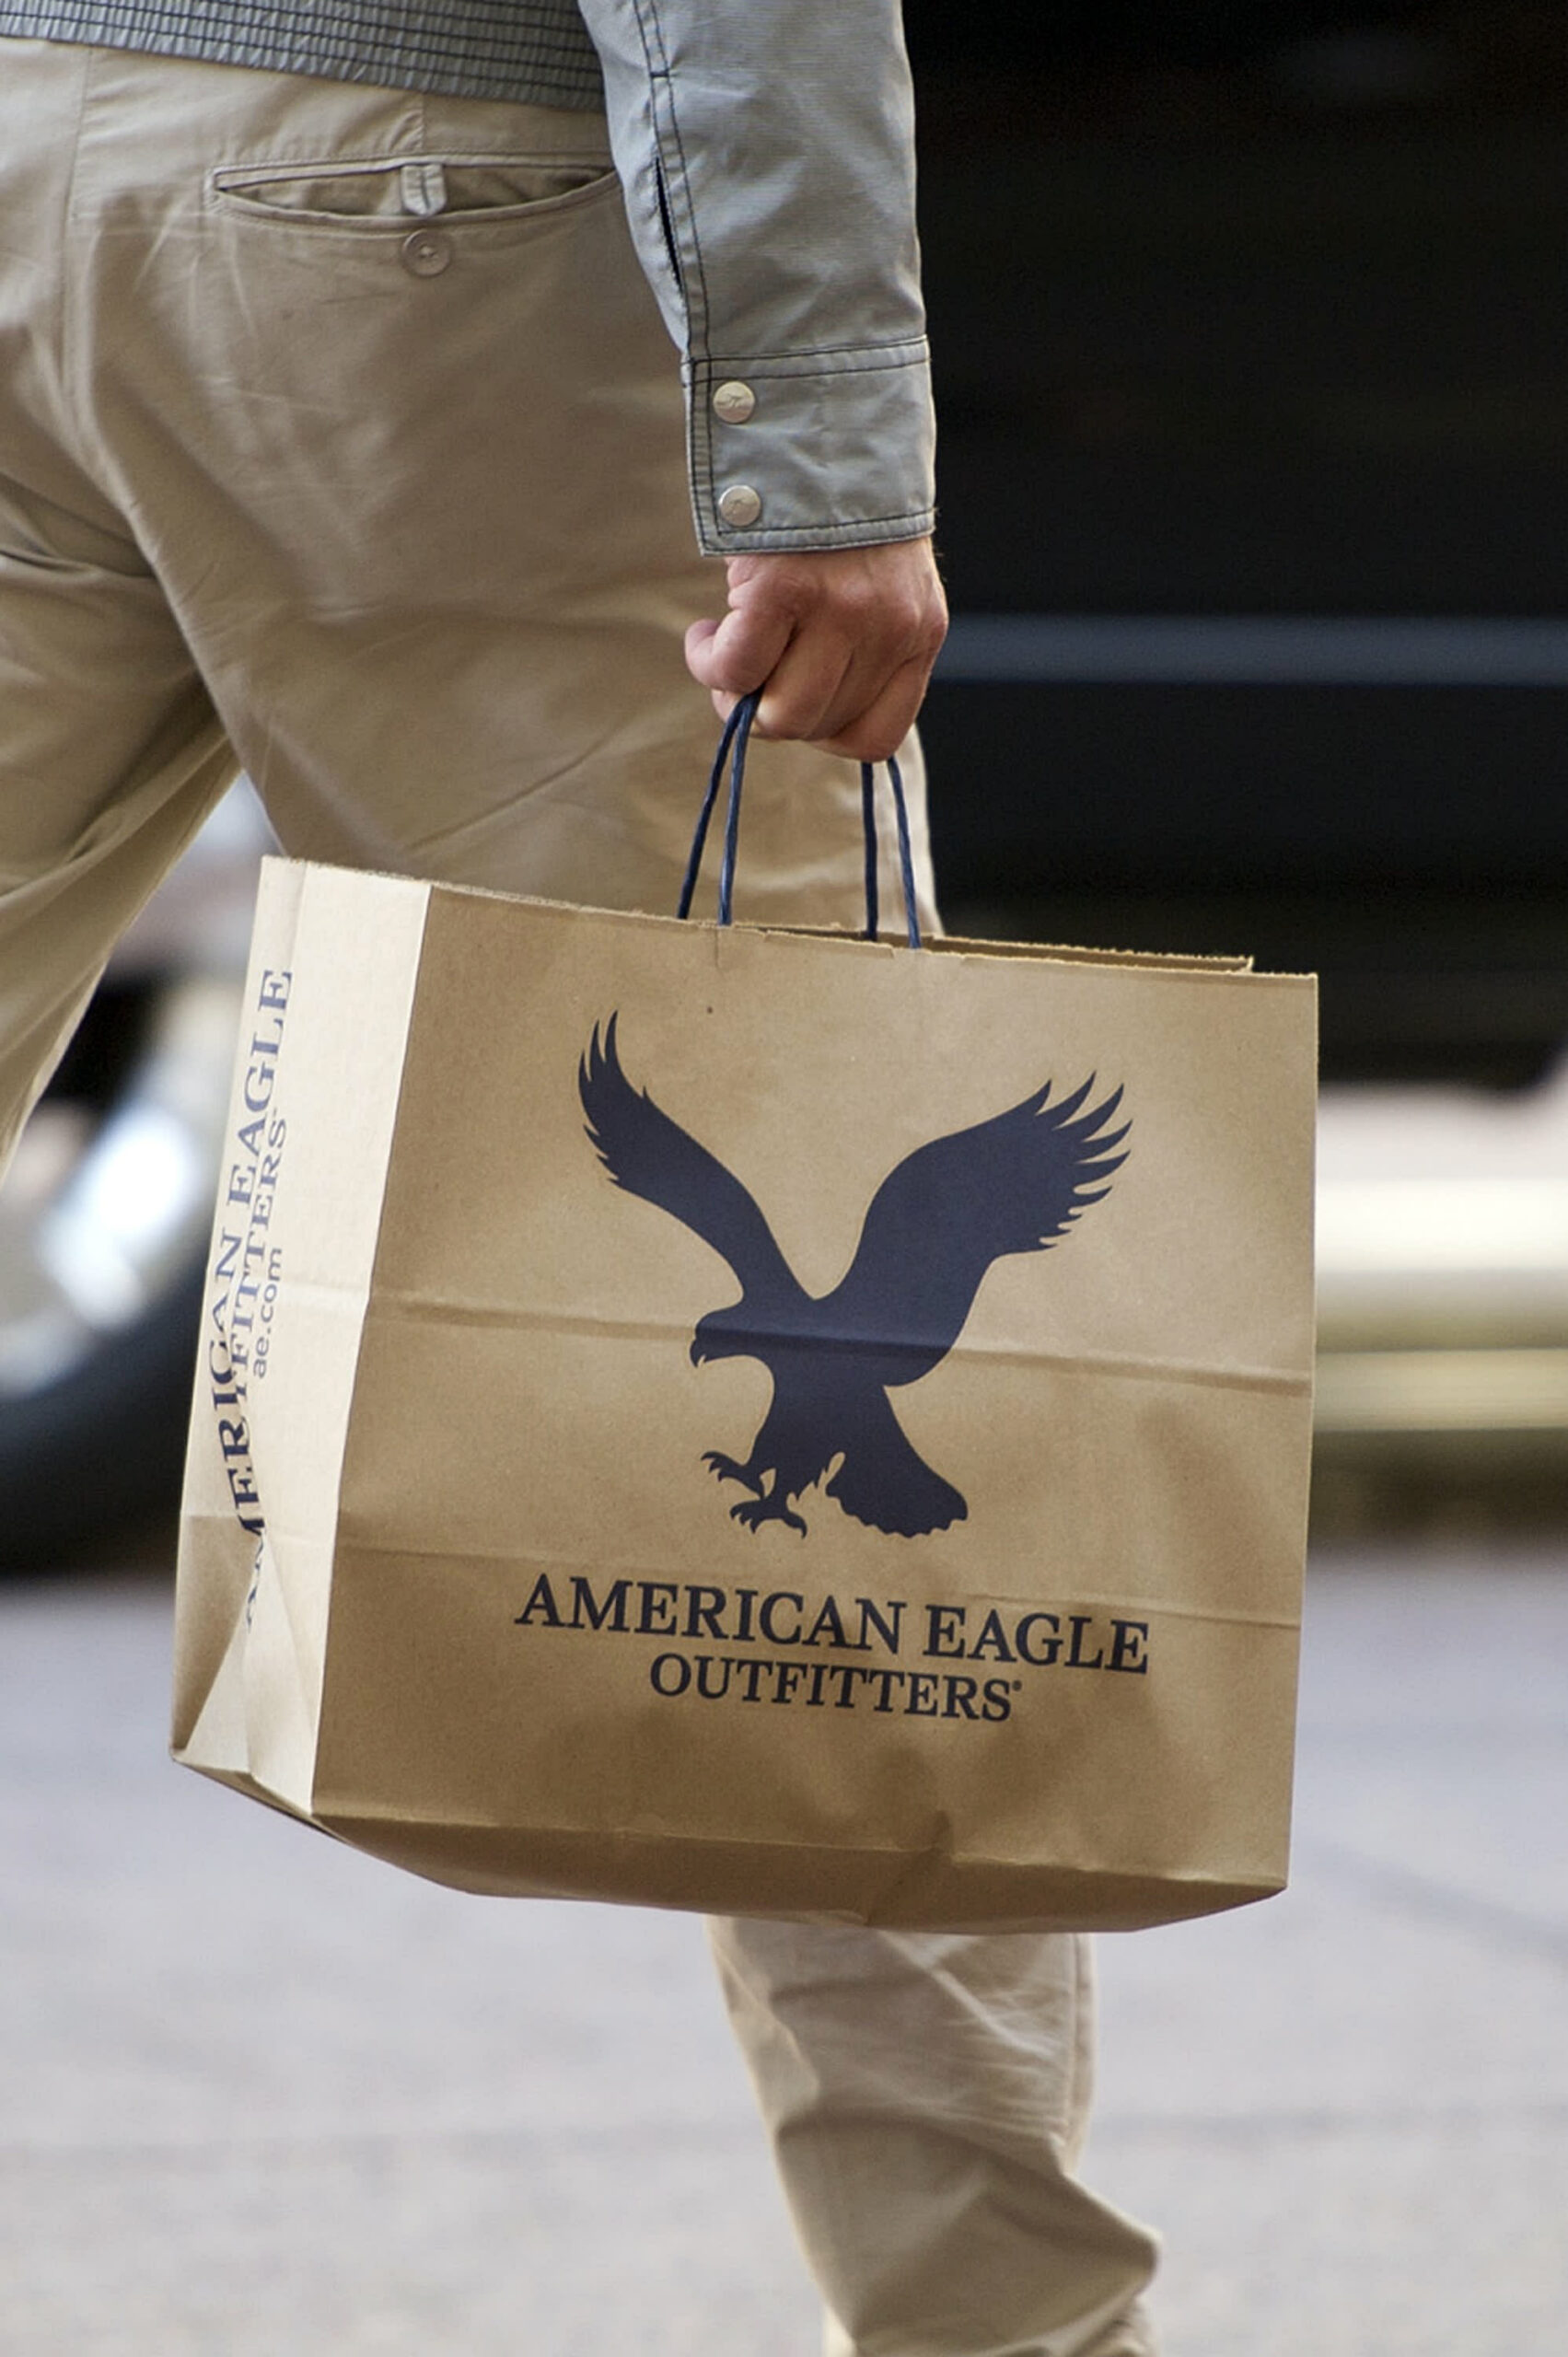 American Eagle Outfitters CEO sees ‘Roaring 20s’-like growth post-pandemic